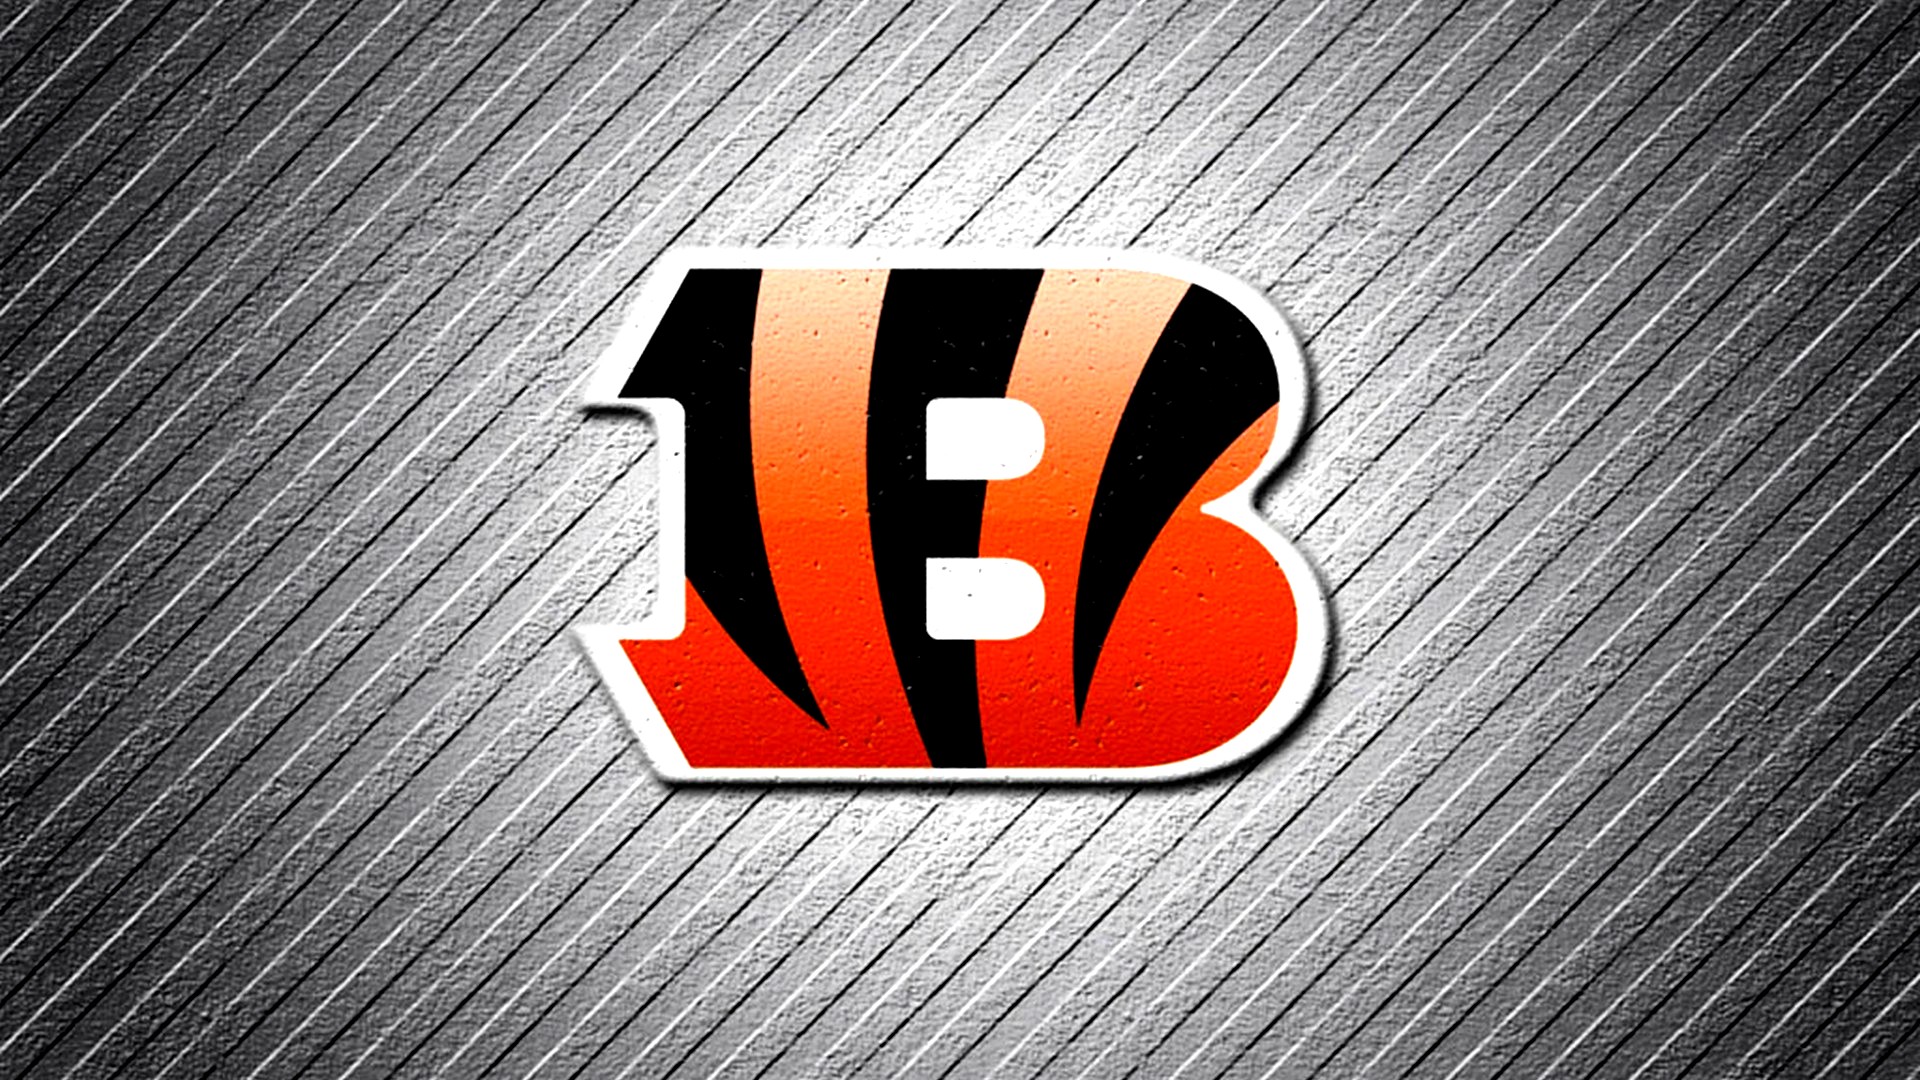 HD Desktop Wallpaper Cincinnati Bengals NFL With high-resolution 1920X1080 pixel. You can use this wallpaper for your Mac or Windows Desktop Background, iPhone, Android or Tablet and another Smartphone device